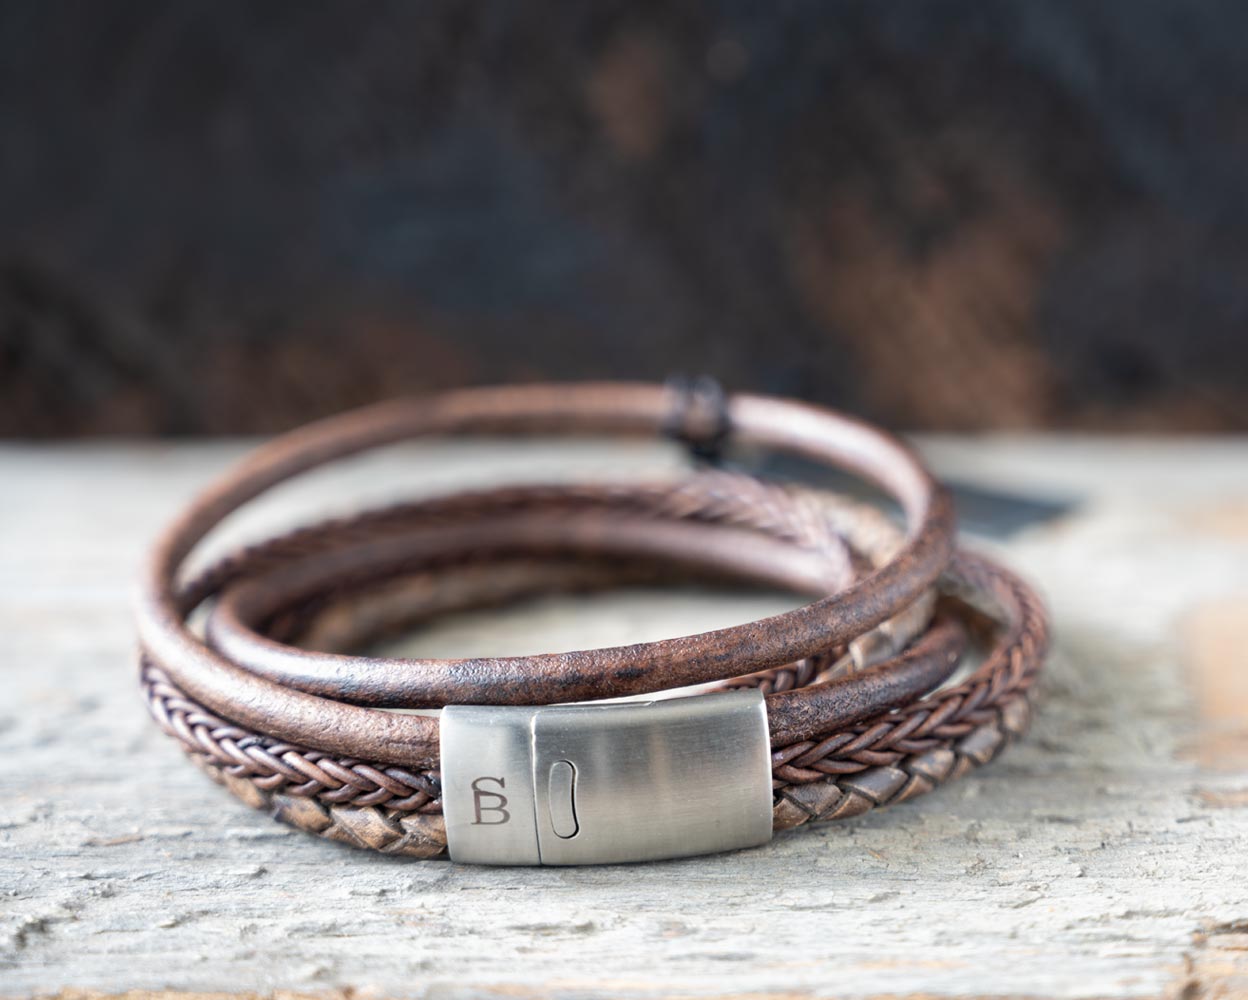 Front view of the brown leather Bonacci bracelet by Steel & Barnett on a rustic piece of wood and backdrop